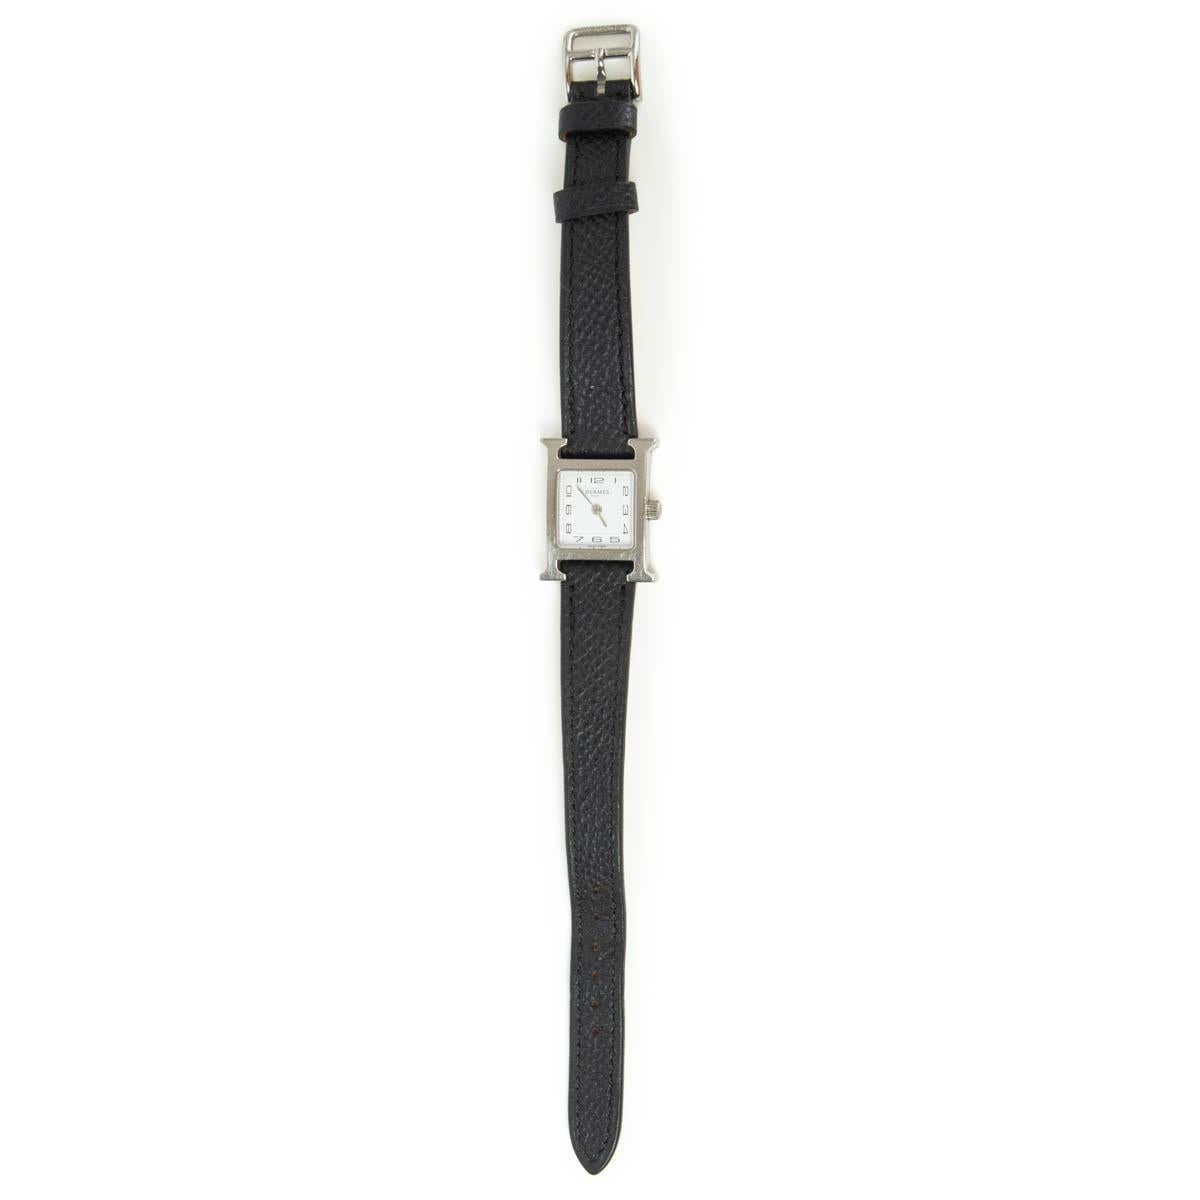 100% authentic Hermès Heure H Watch Mini Modèle 21mm in steel with a white dial and sunburst stamped. Quartz movement and strap made of black Epsom calfskin. Hour, minute functions. Has been worn and shows some scratches to the hardware and wear to